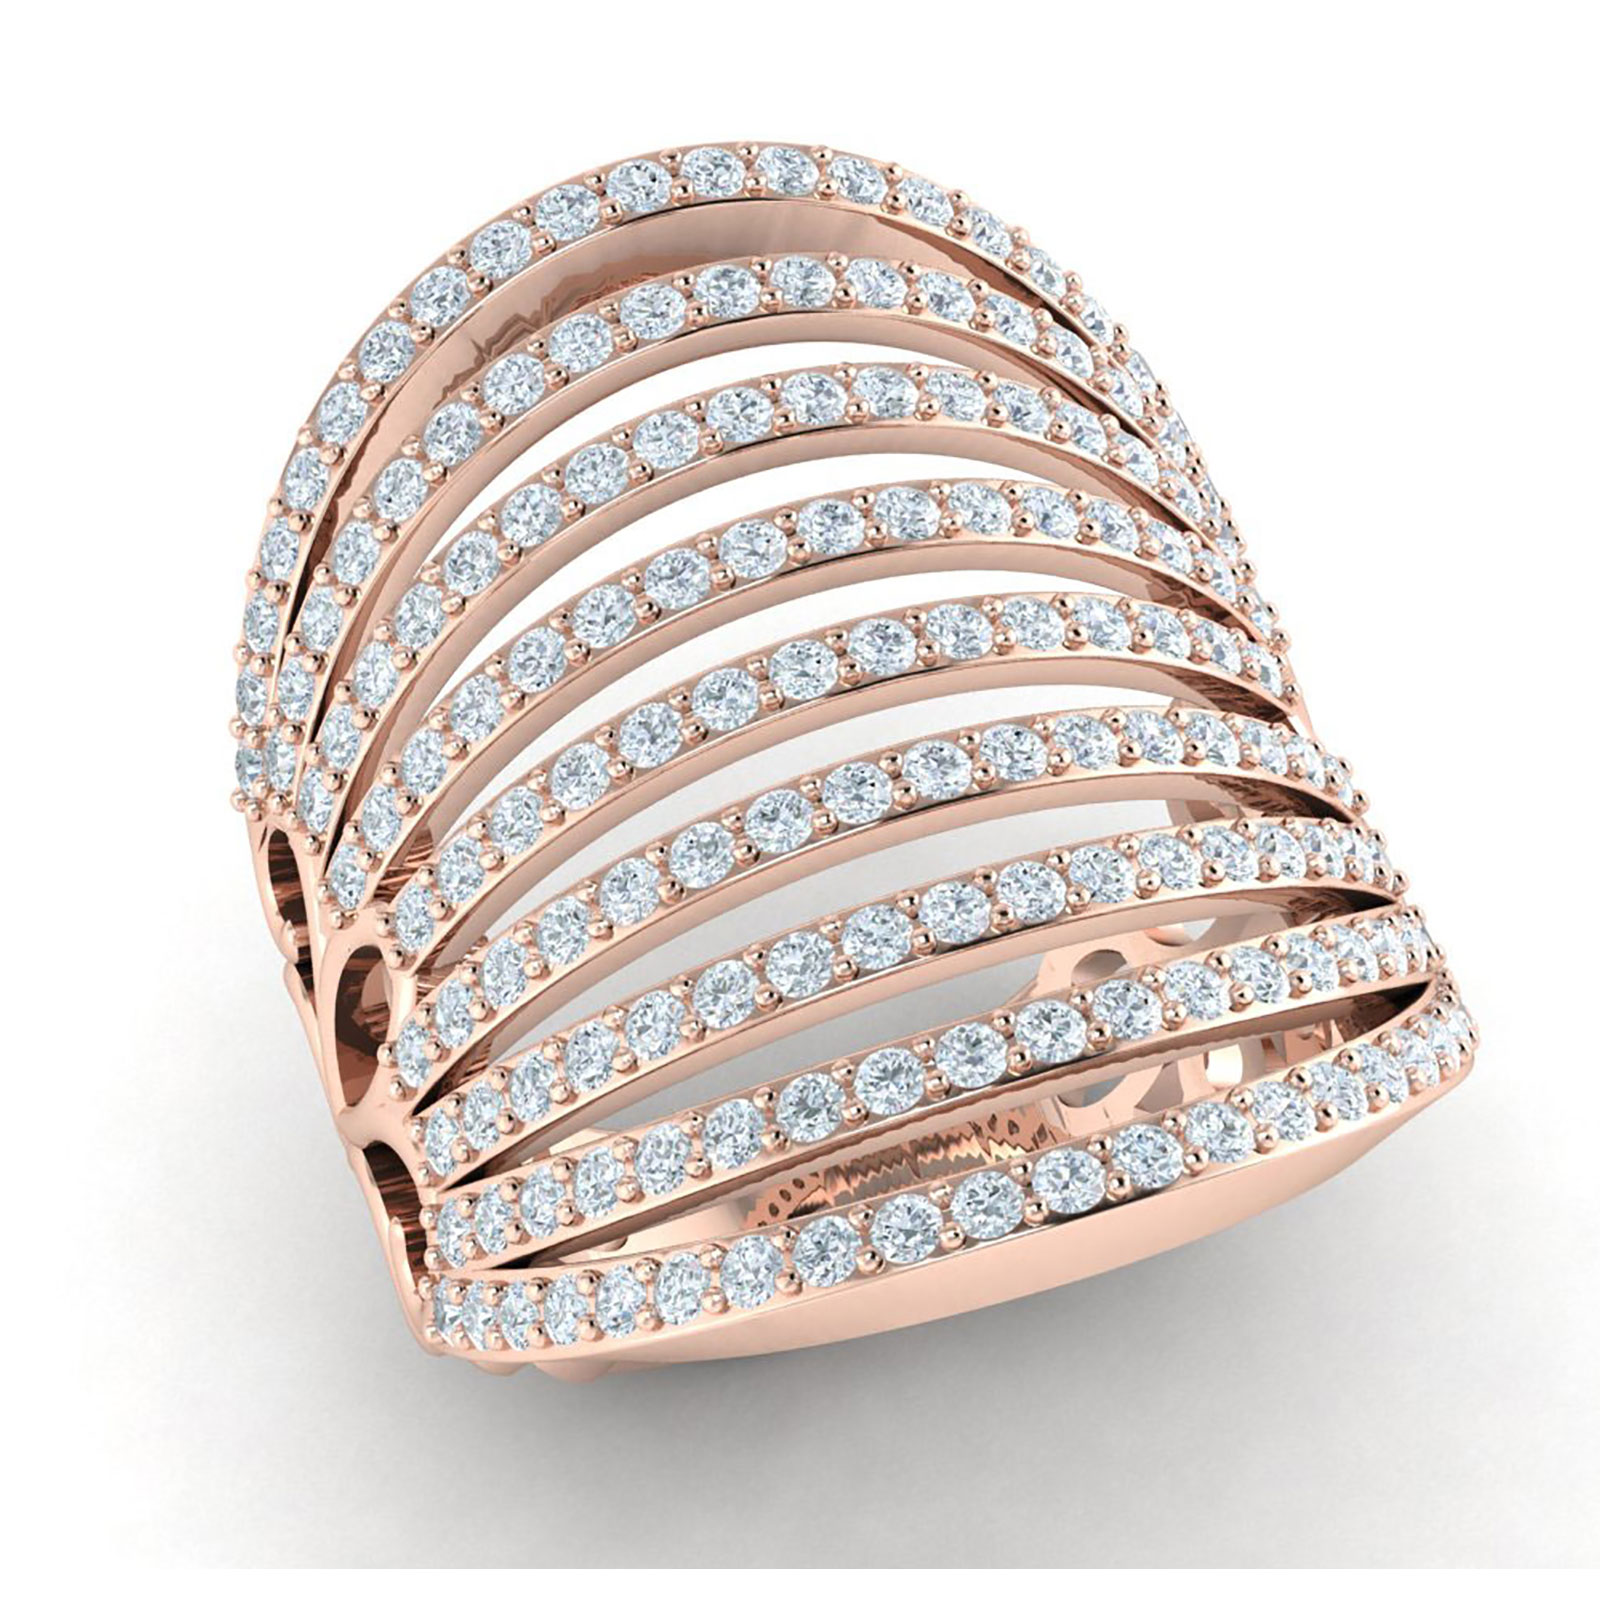 Jewel We Sell 1.5ct Round Cut Not Enhanced Diamond Men's Wide Cluster Wedding Band Ring Anniversary 10K Rose Gold